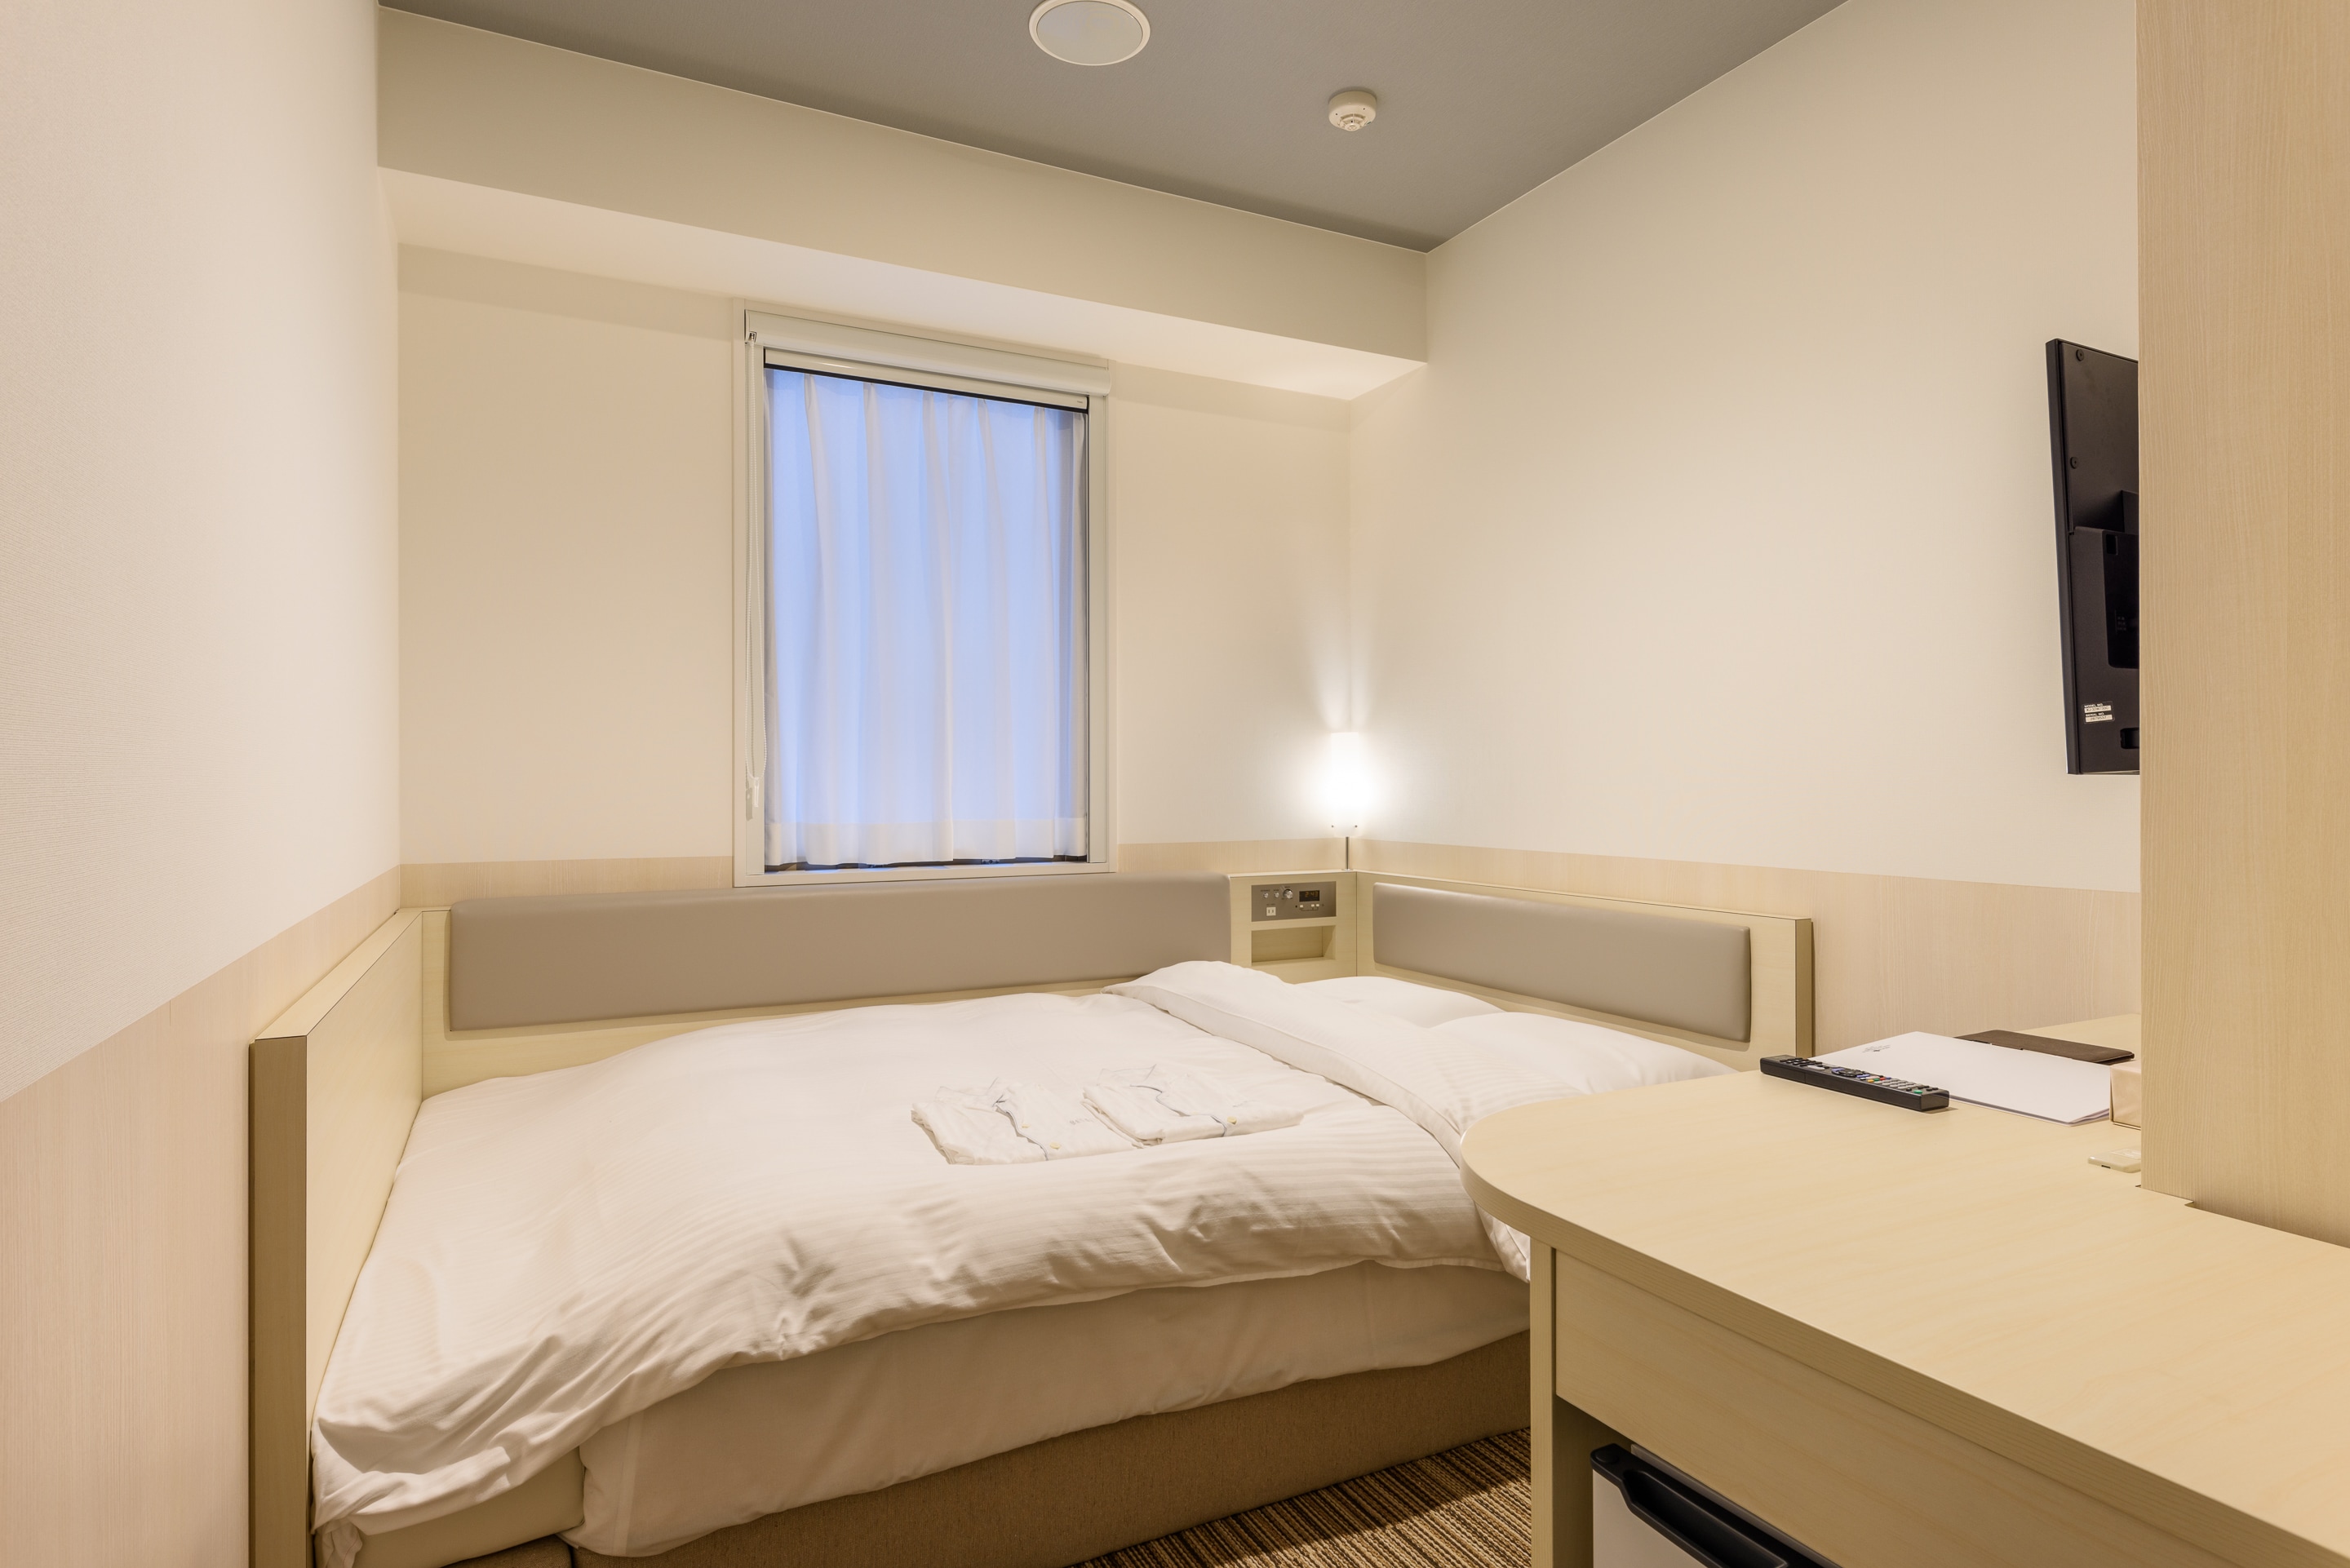 "Guest room" ◇ Belken single ◇ Area 12.3㎡ / Bed width 139cm Equipped with Serta bed & lt; Non-smoking & gt;